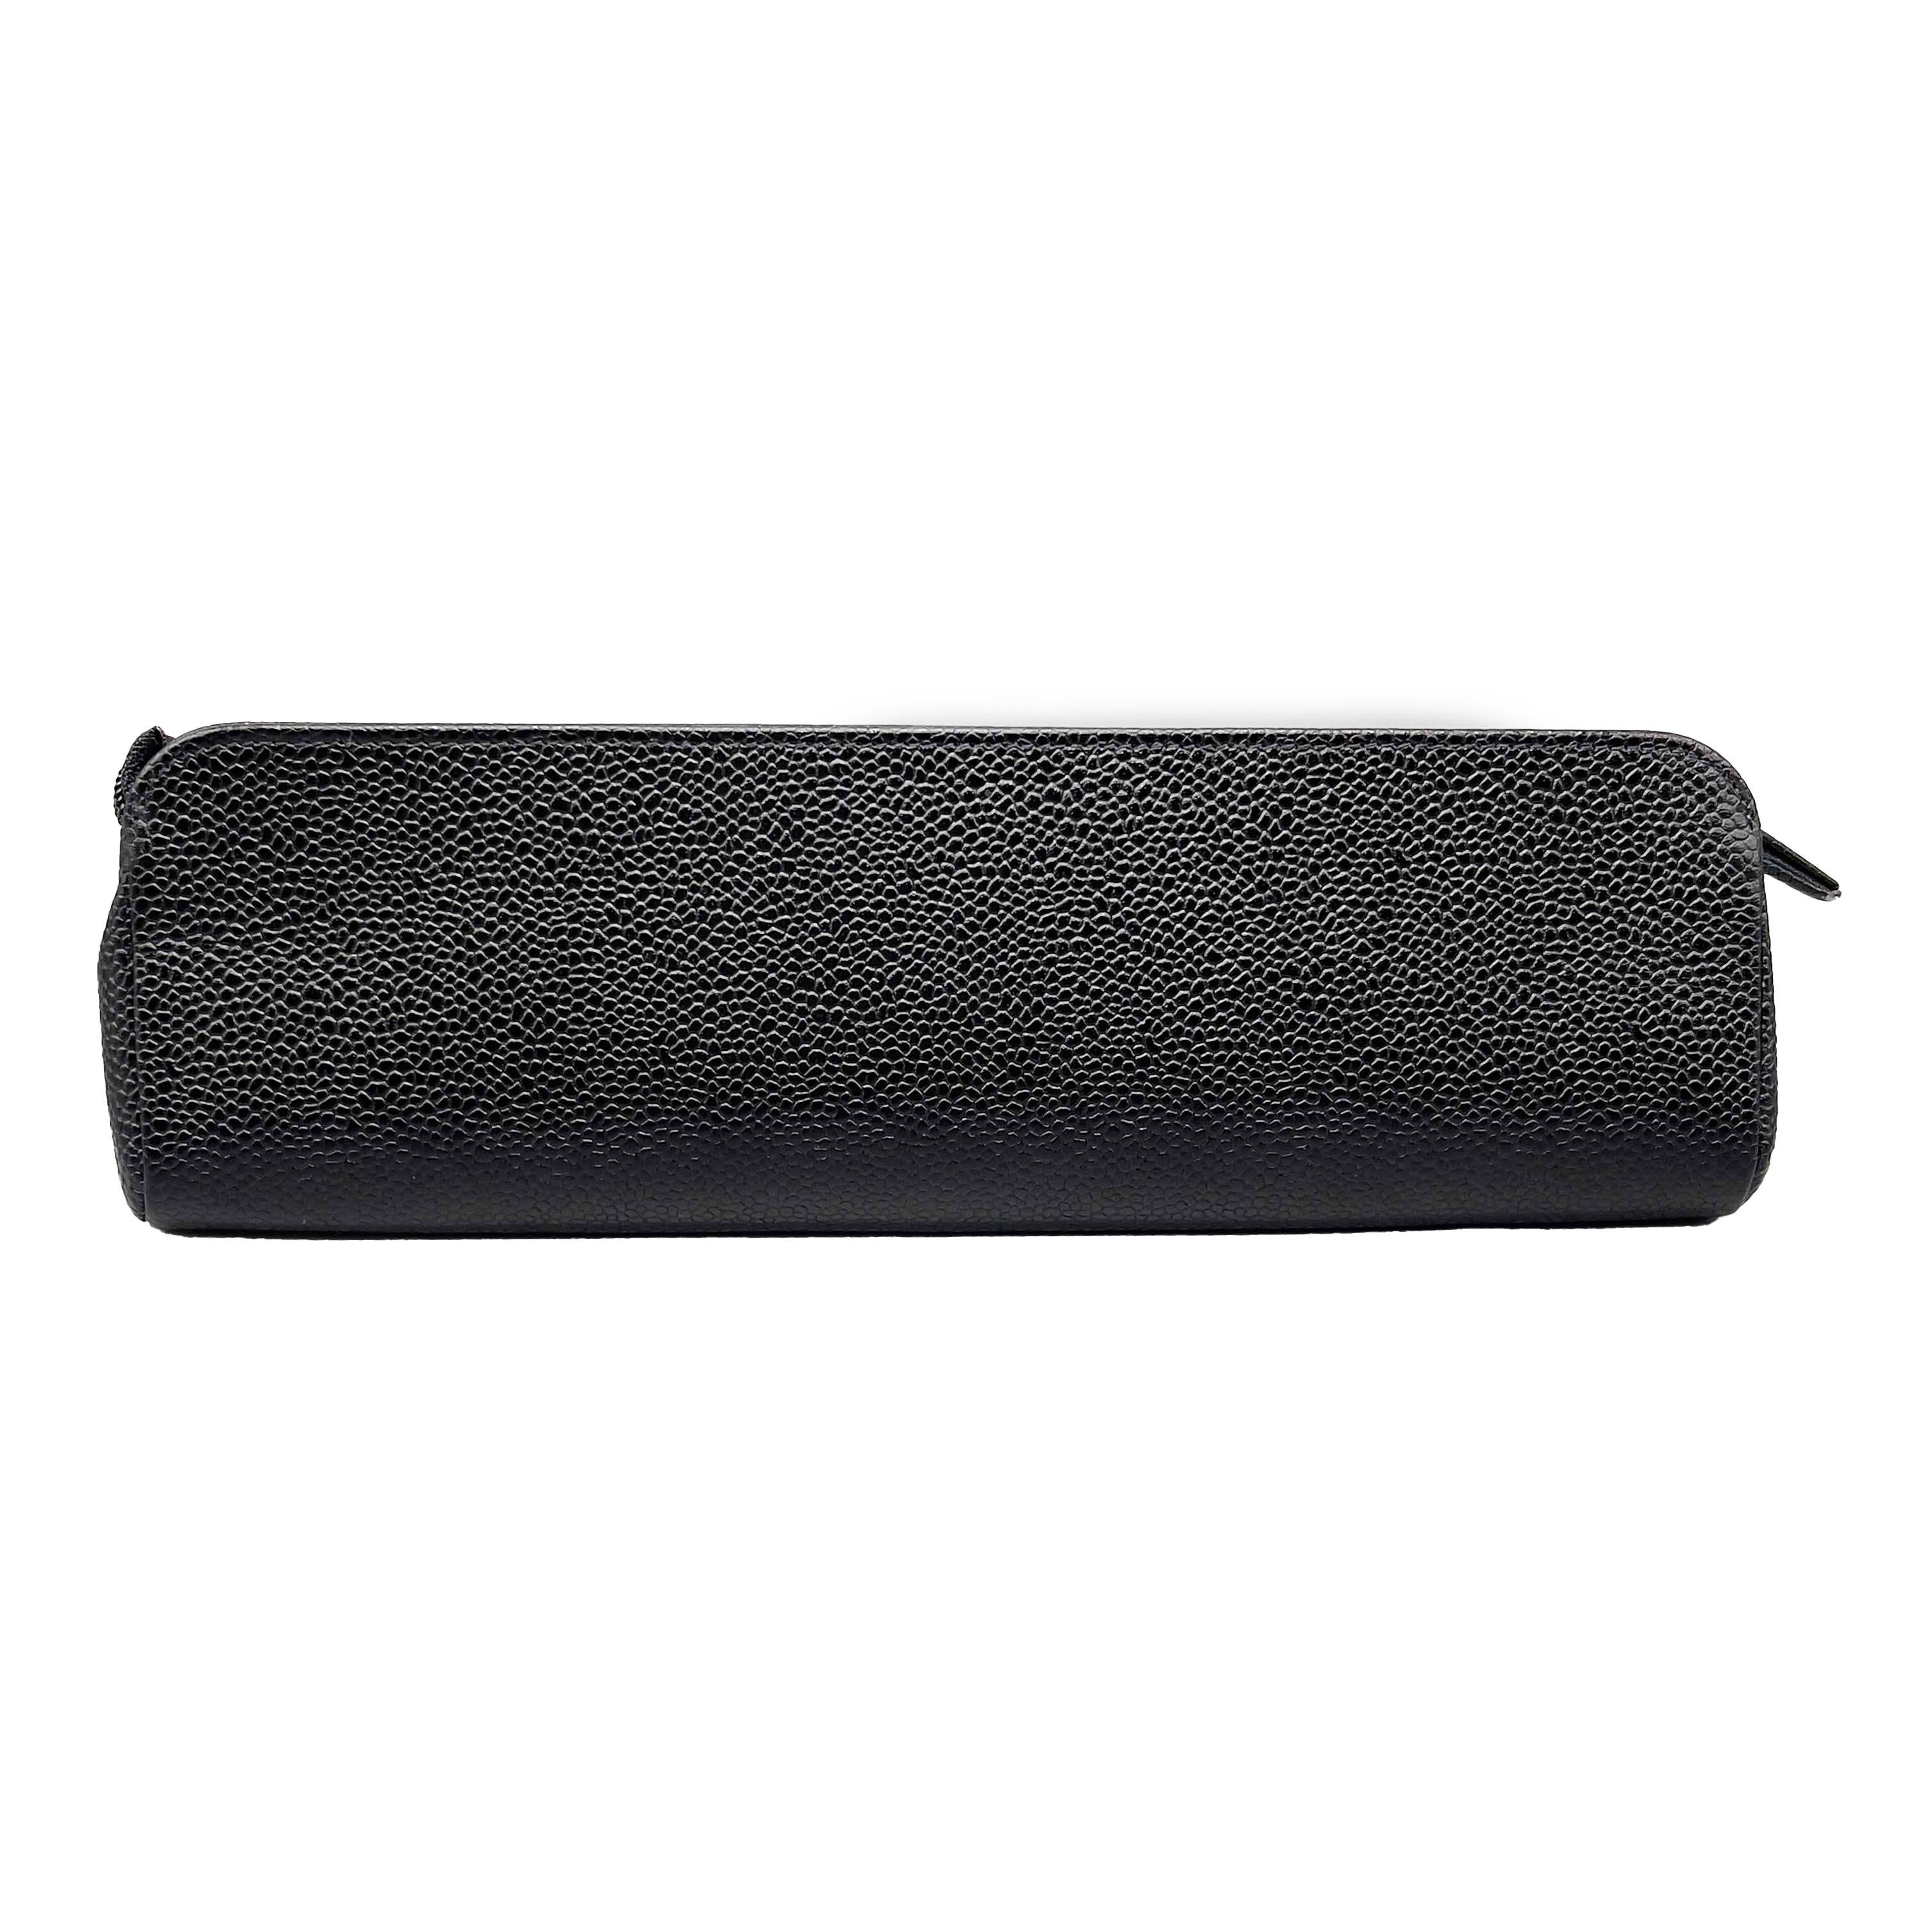 CHANEL - Vintage 1996 Black Pencil Case / Pouch - Caviar Leather / CC Logo Gold

Description

This late 90's vintage Chanel pencil case comes in a slim black model, and is made of caviar leather with the iconic interlocking CC logo in gold-tone